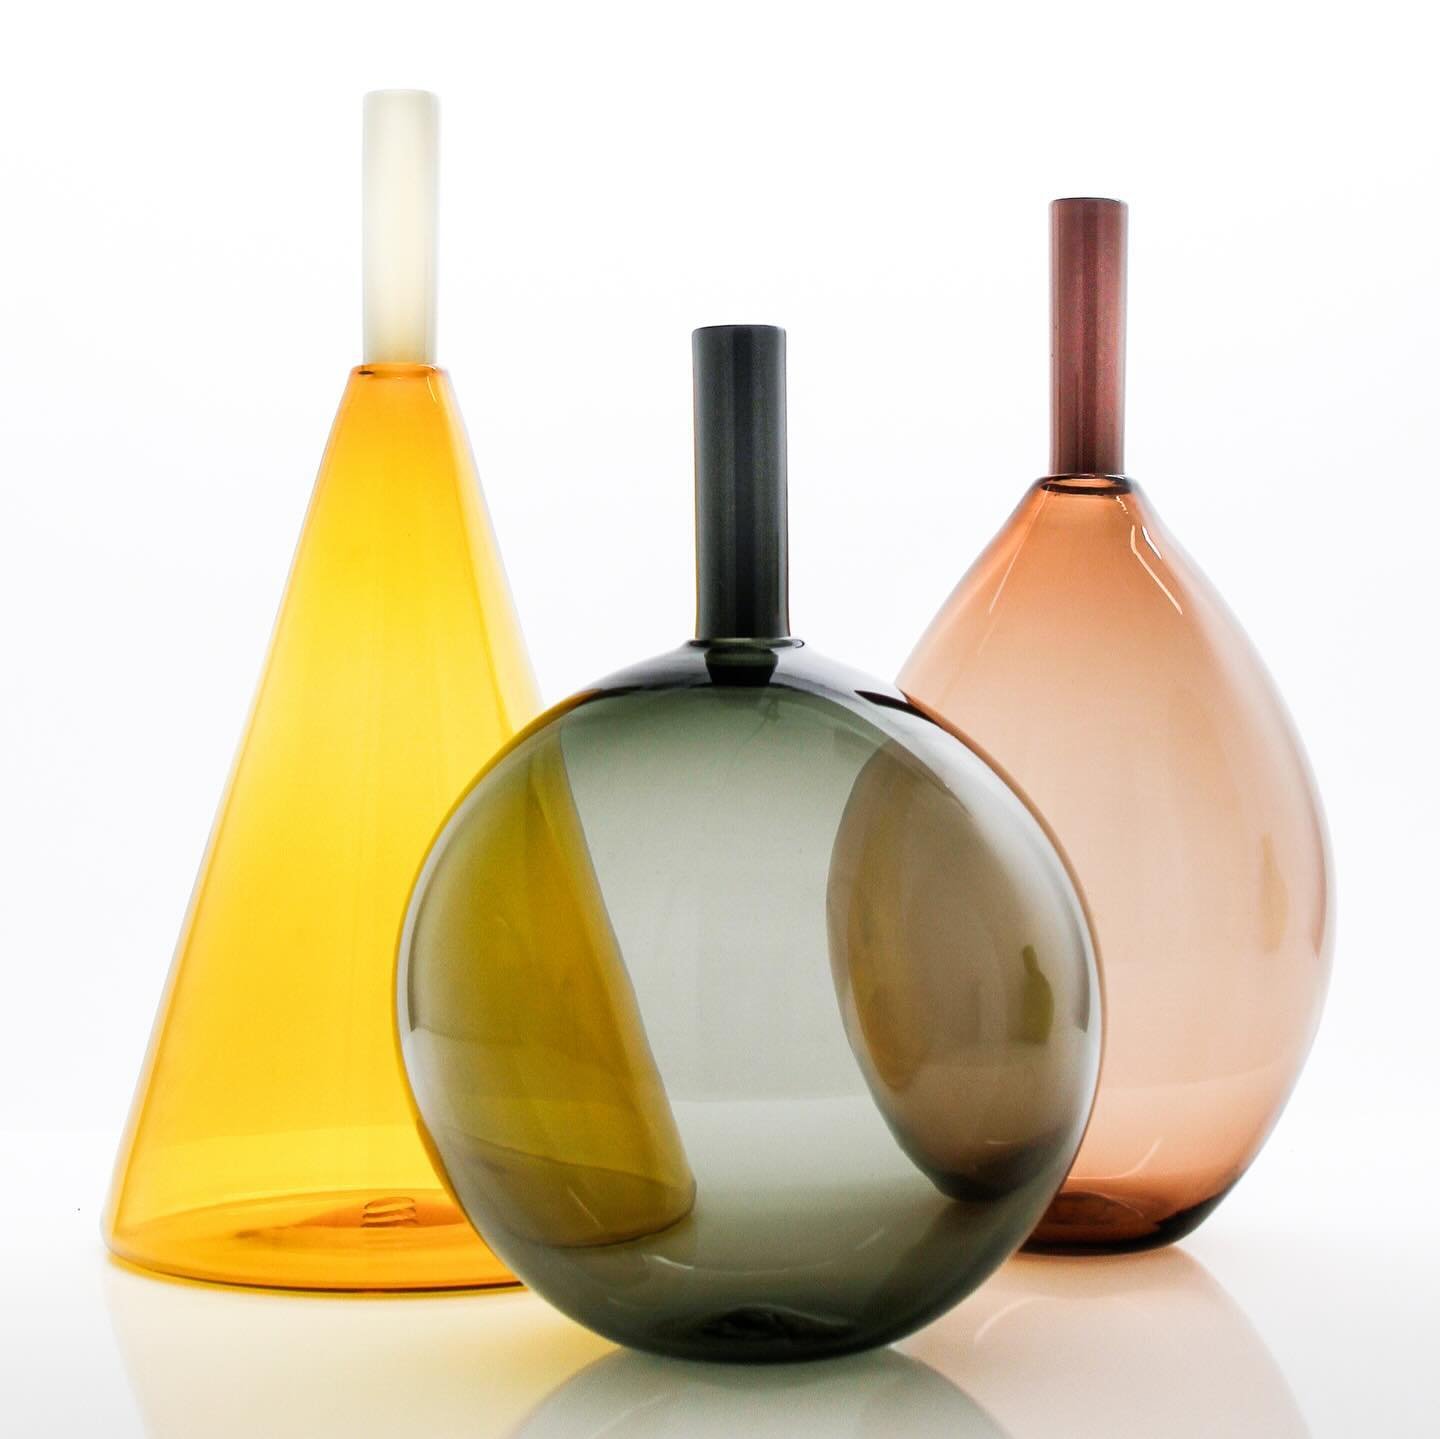 What&rsquo;s your preference, color mixing or monochromatic?

Tube Tops - Medium 
Blown Glass with welded union
Design by Lynn Read 2012
Made in the Portland, Oregon 
11-17&rdquo; tall

#vitreluxe_events #pdx #colorstory 

#handmade&nbsp;#artisanmade